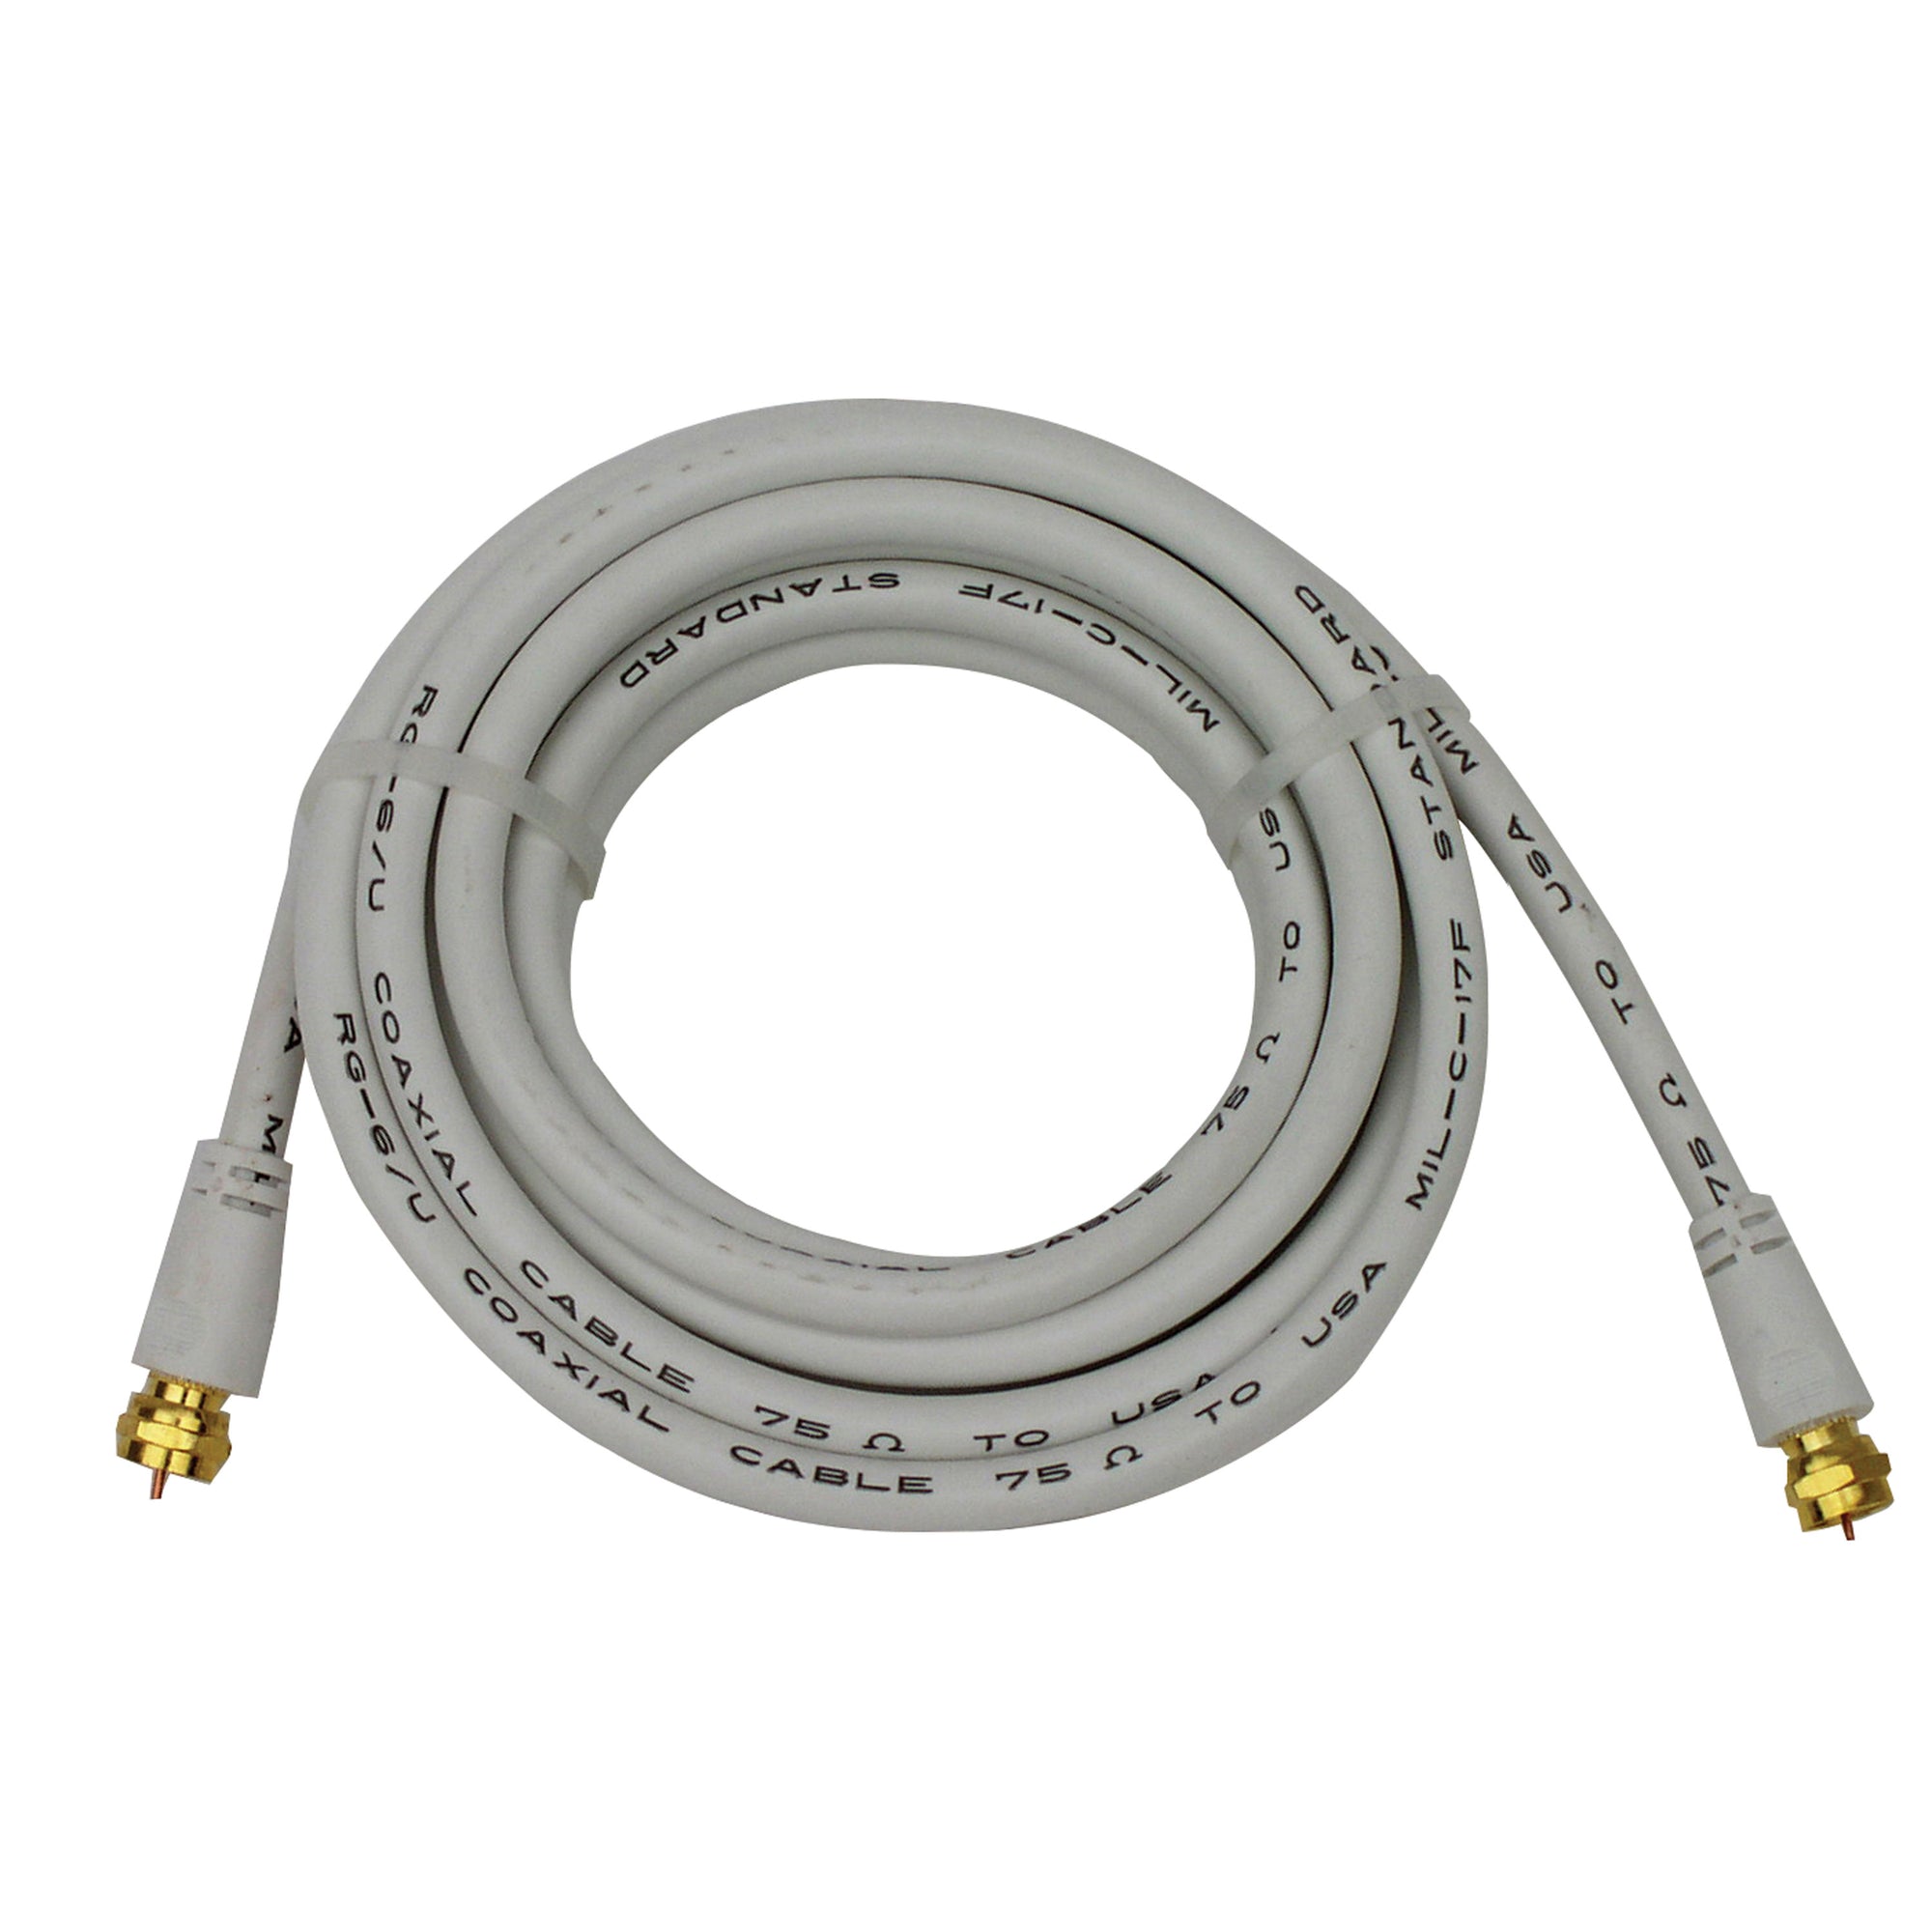 Prime Products 08-8025 Coax Cable - 100'